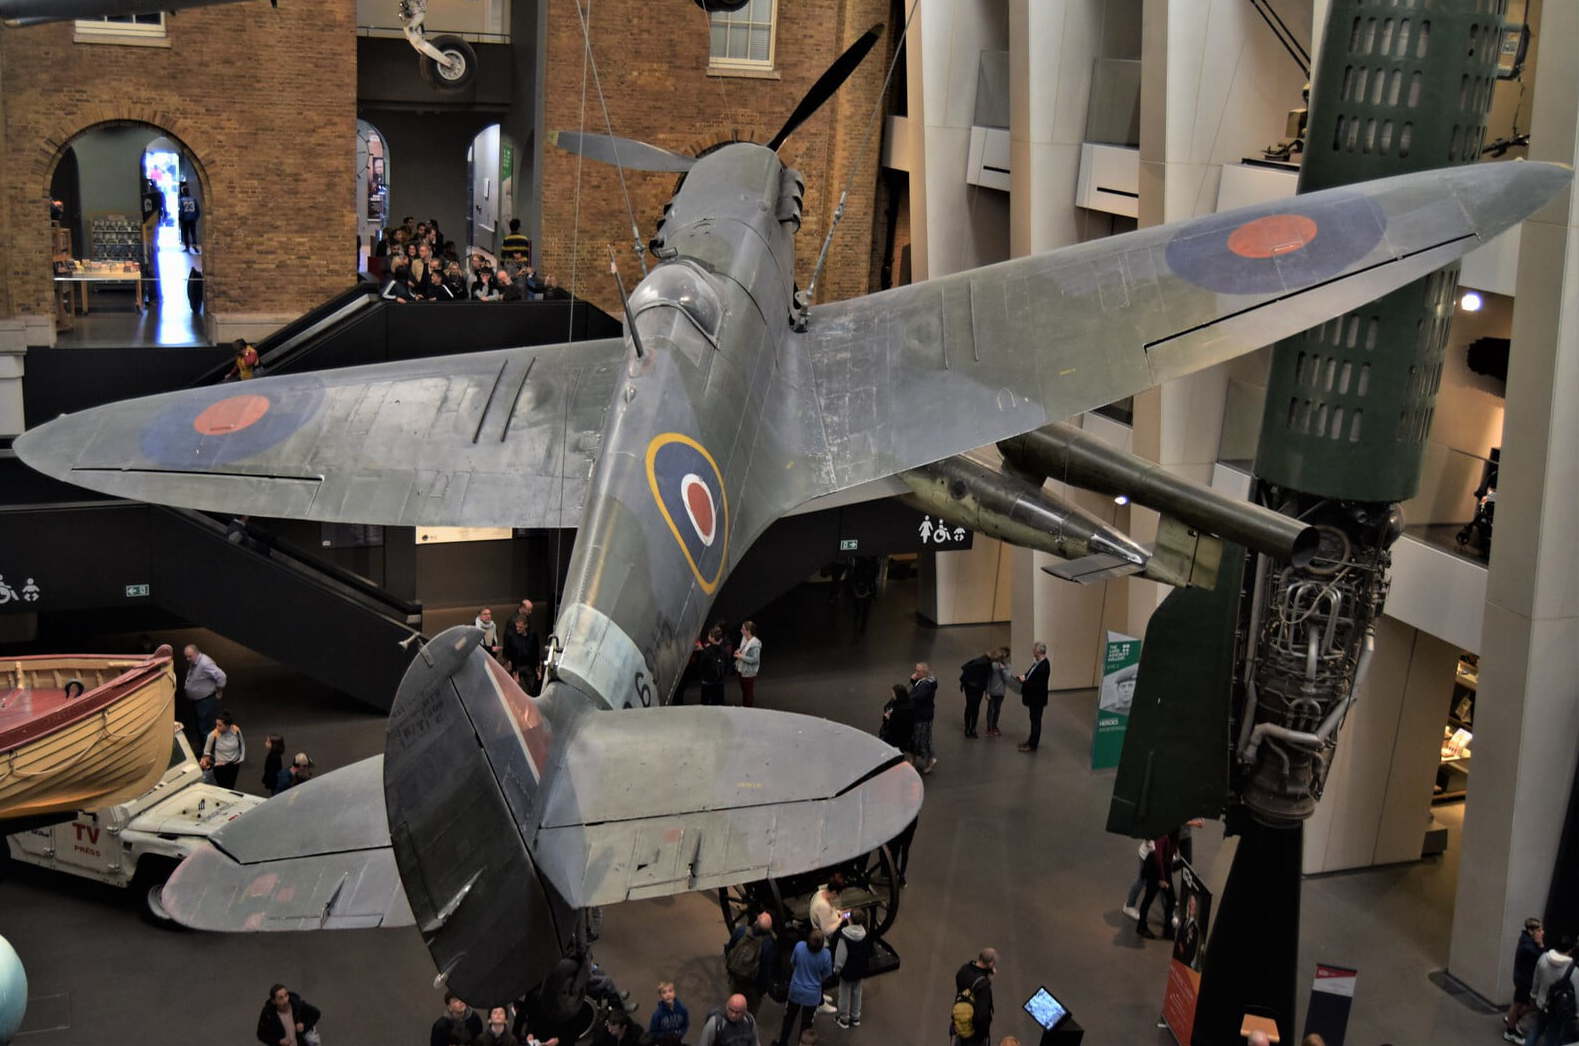 A spitfire plane suspended in the entrance hall at the Imperial War Museums, London